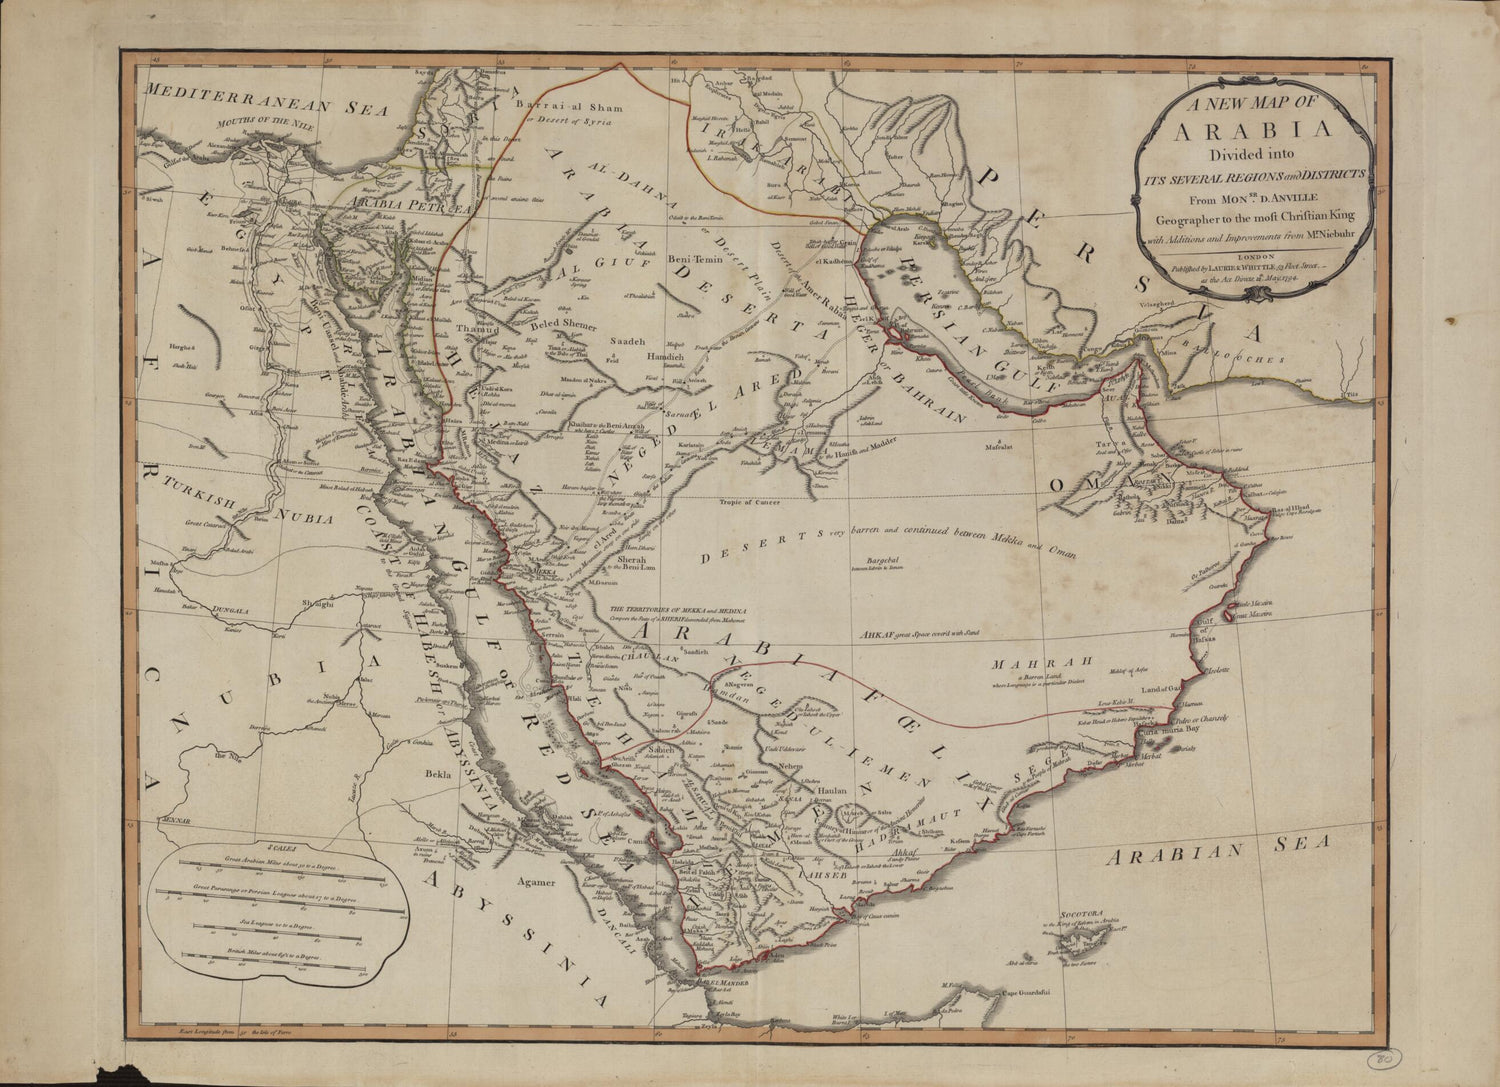 This old map of A New Map of Arabia: Divided Into Its Several Regions and Districts. (A New Map of Arabia: Divided Into Its Several Regions and Districts) from 1794 was created by  Baptiste Bourguignon D, Carsten Niebuhr in 1794